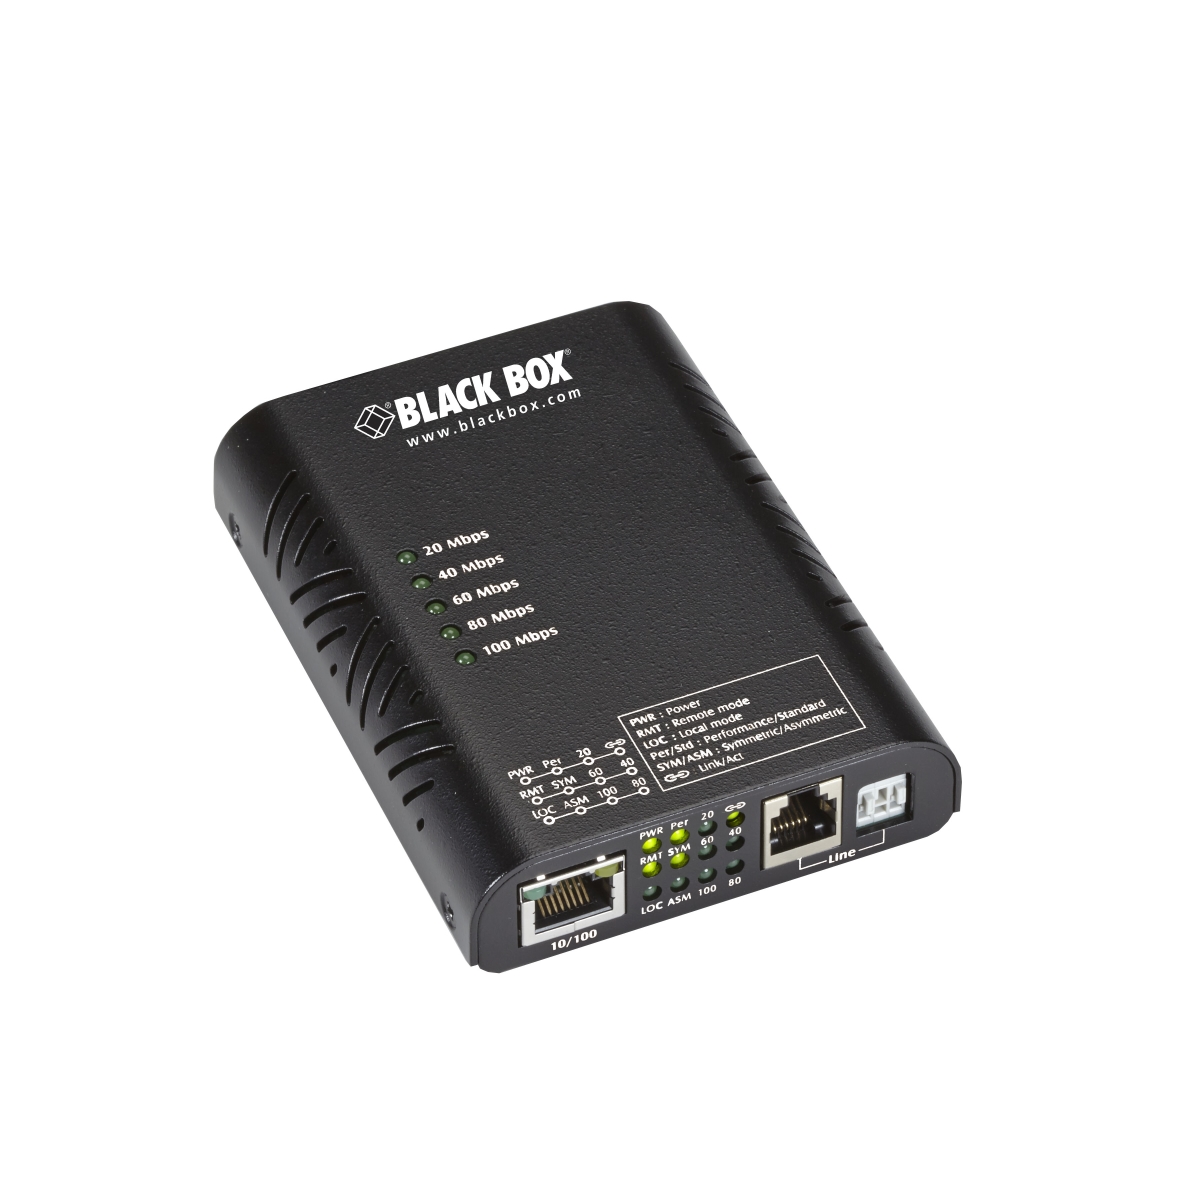 Picture of Black Box LB320A Single Port 10-100 Link Gain Industrial Ethernet Extender